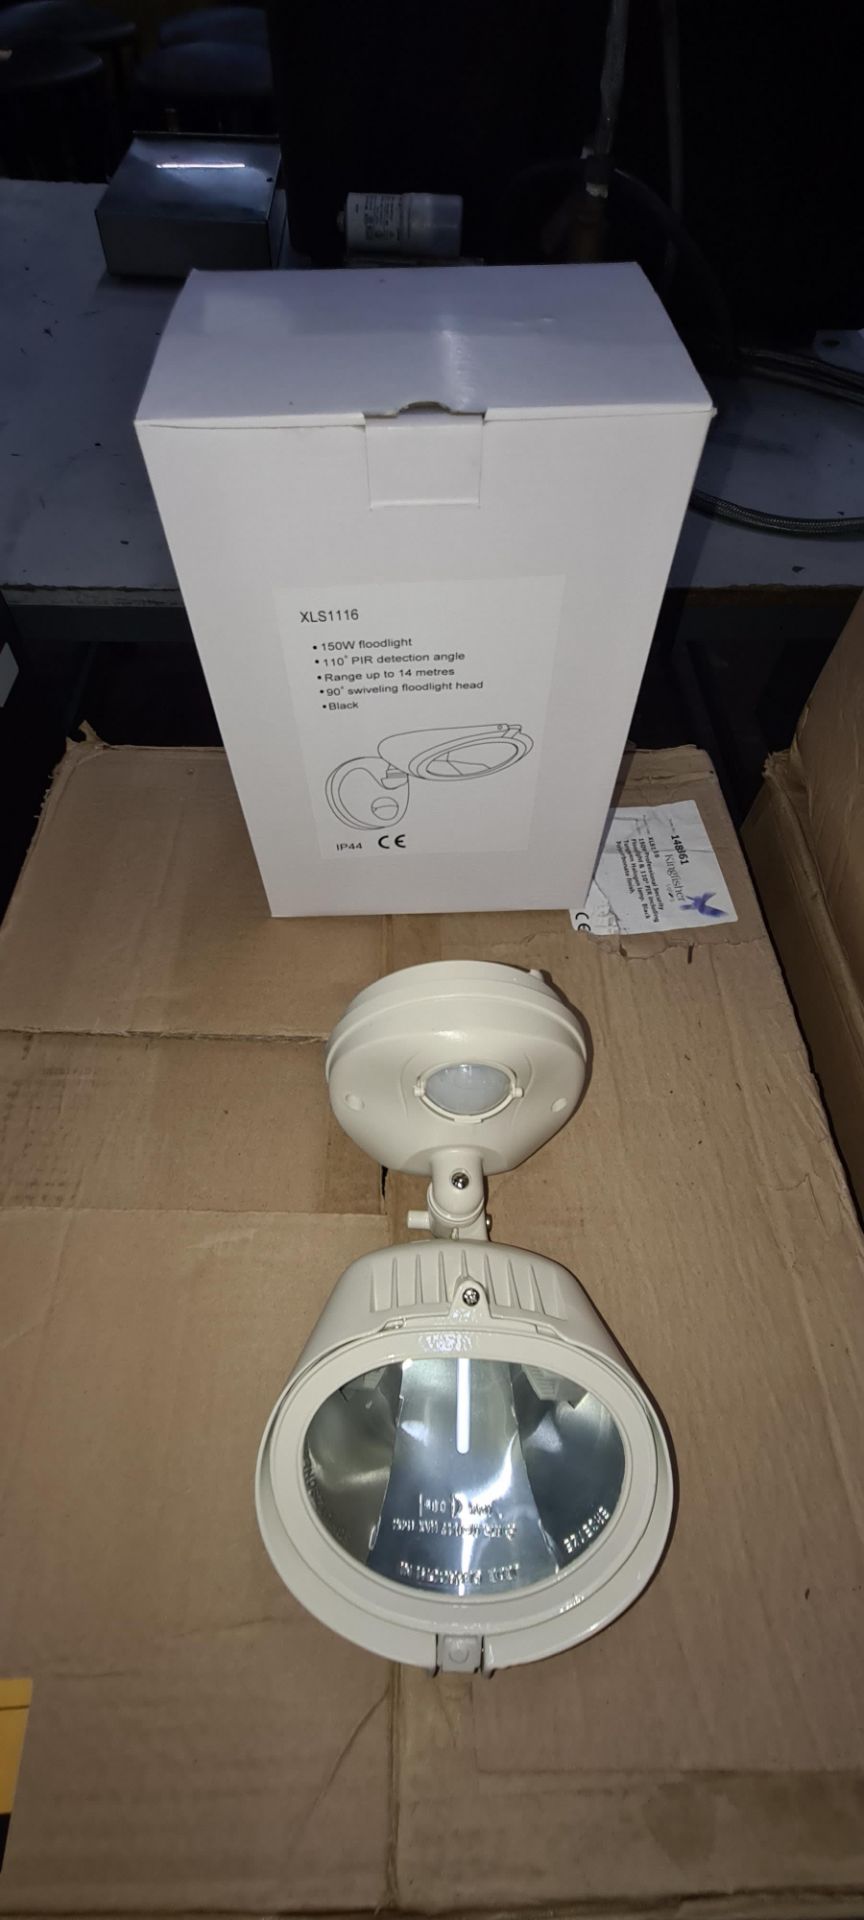 24 off 150W PIR detection floodlights - 2 large cartons